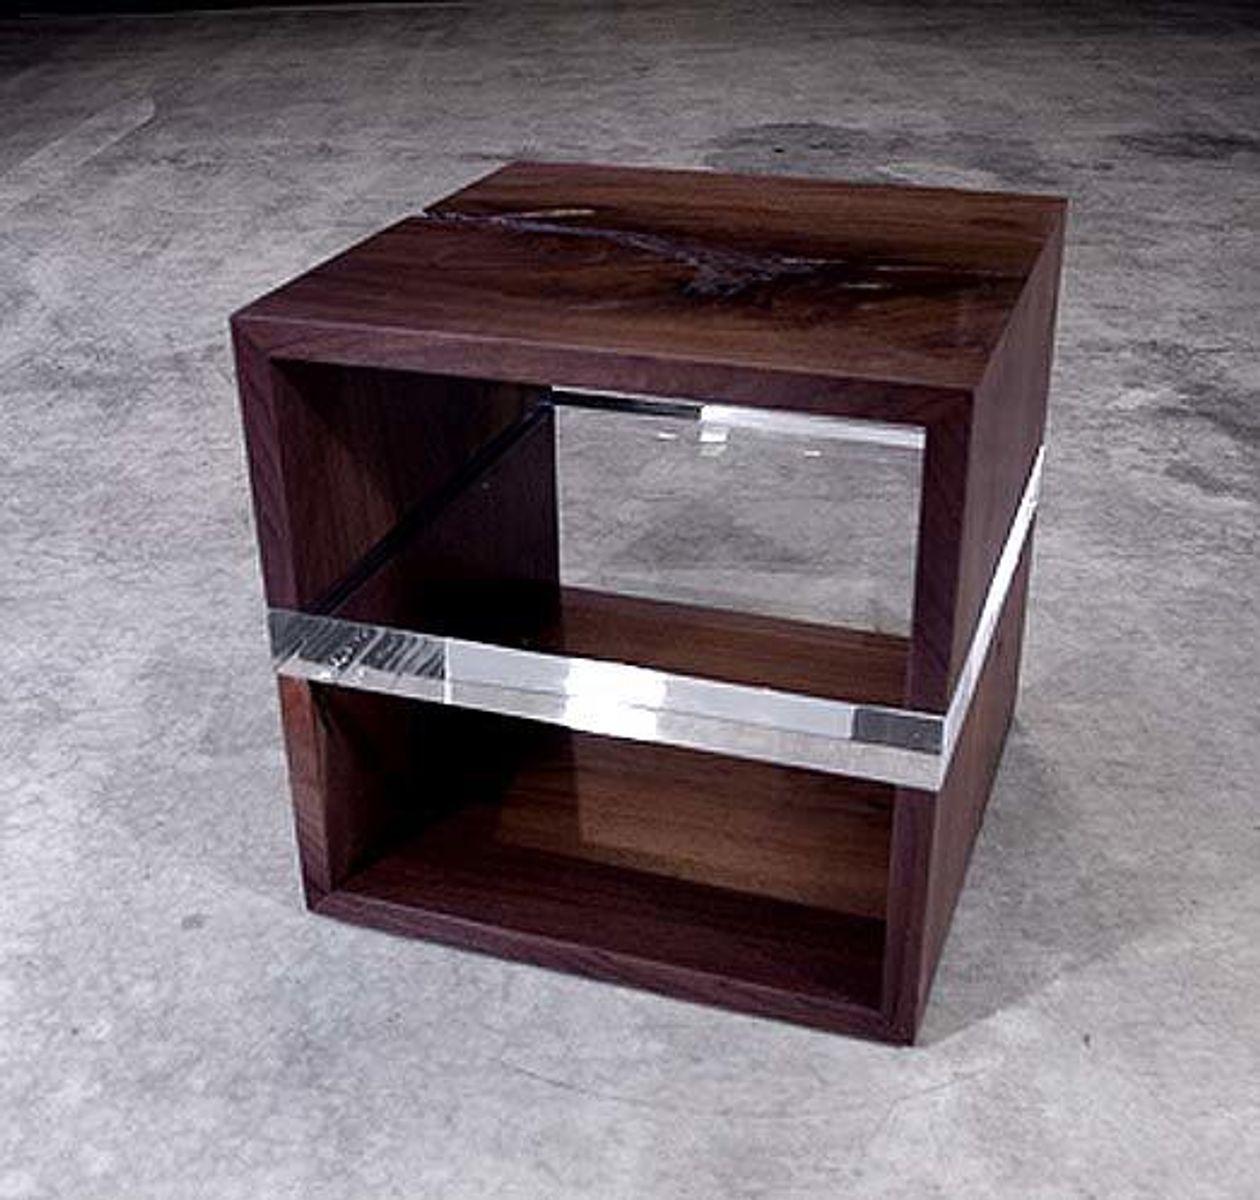 Modern Black Walnut Side Table with Acrylic Shelf In New Condition For Sale In Hobart, NY